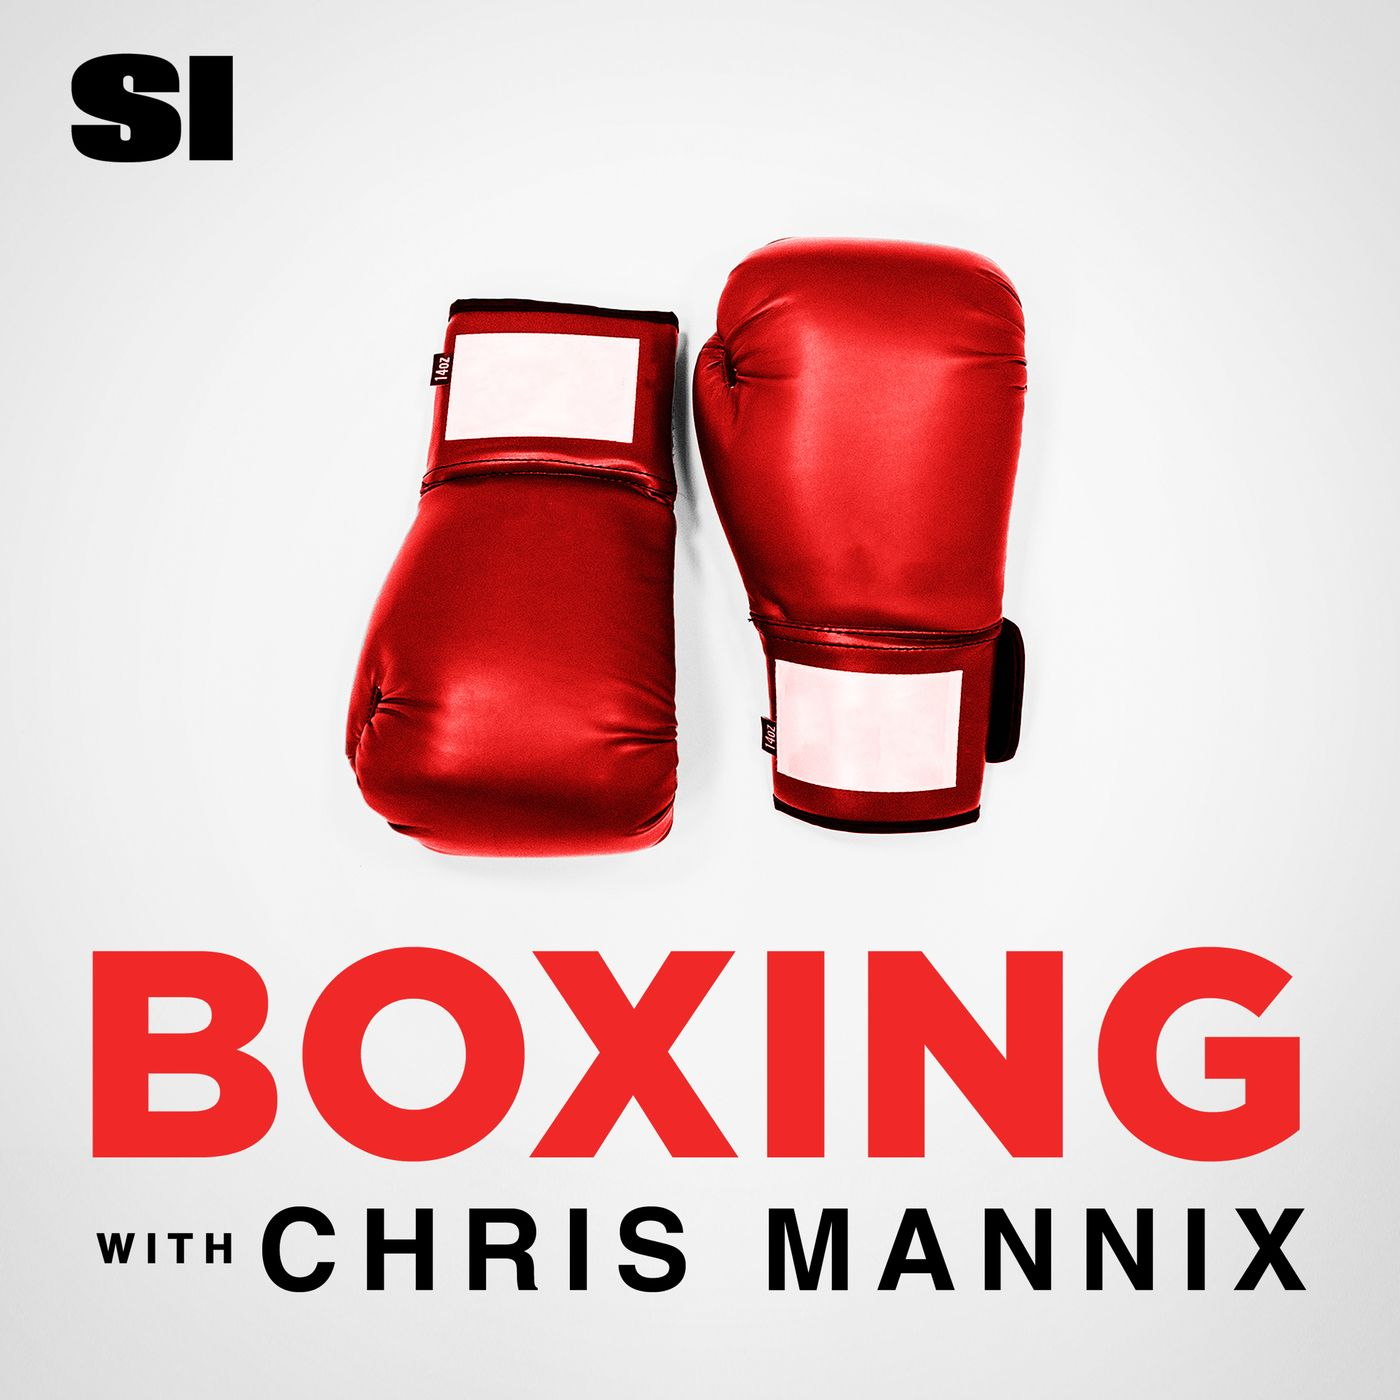 A highlight from Boxing with Chris Mannix - Crossroads at the Cosmo